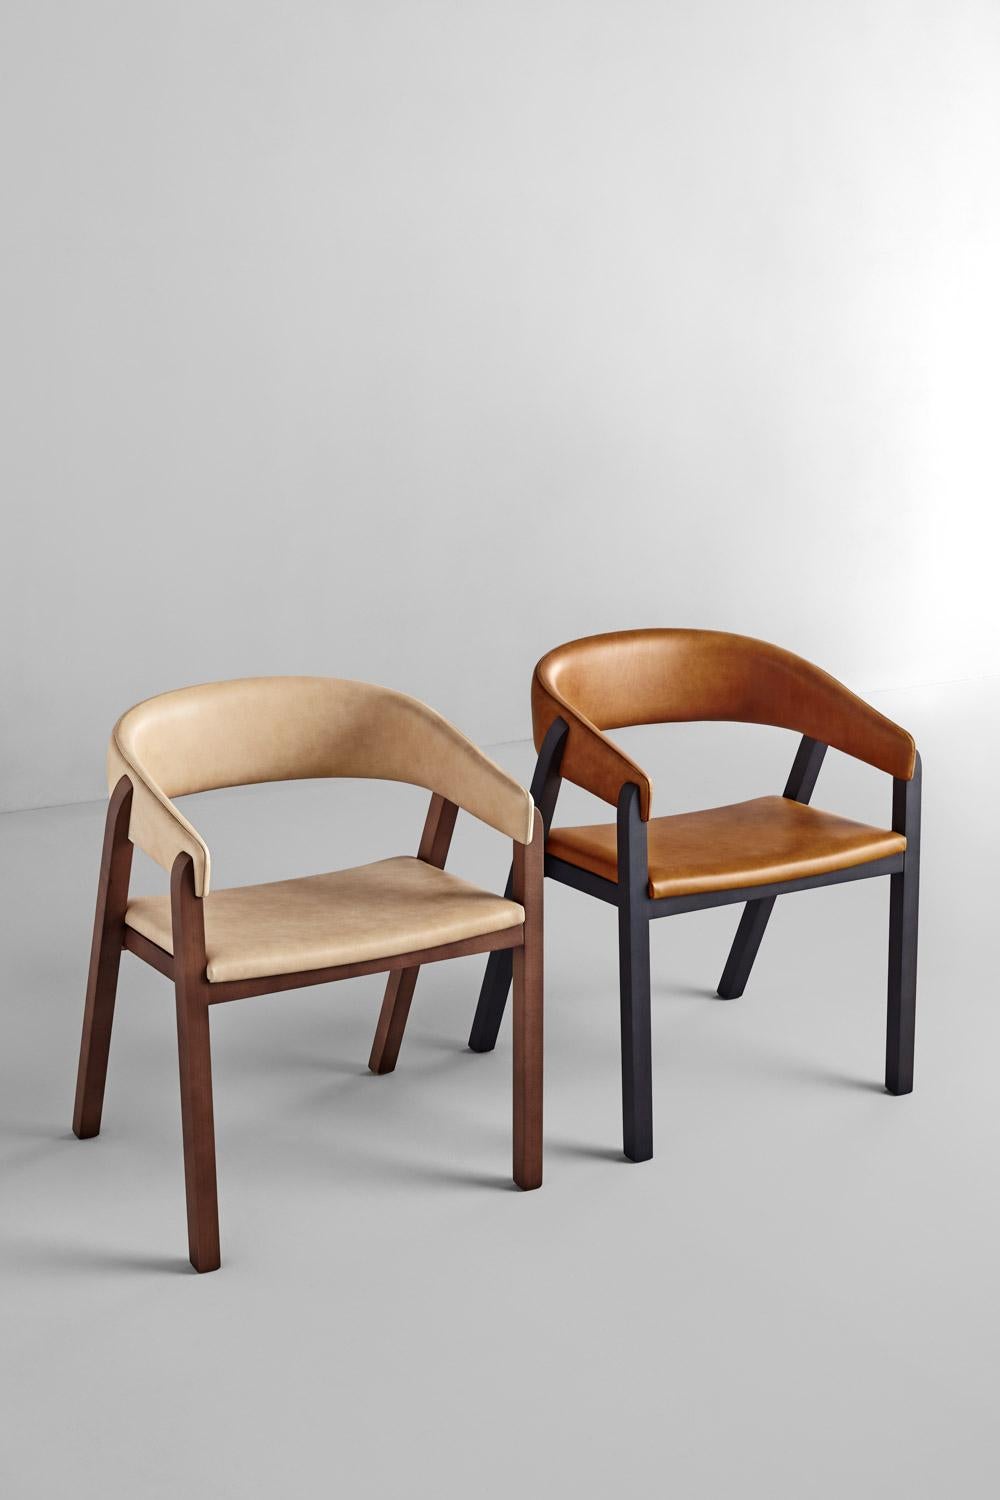 A set of 2 Oslo chairs - brown by Pepe Albargues
Dimensions: W 59, D 50, H 75, seat 46
Materials: Beech wood structure
Foam CMHR (high resilience and flame retardant) for all our cushion filling systems

Also available: Variations of materials